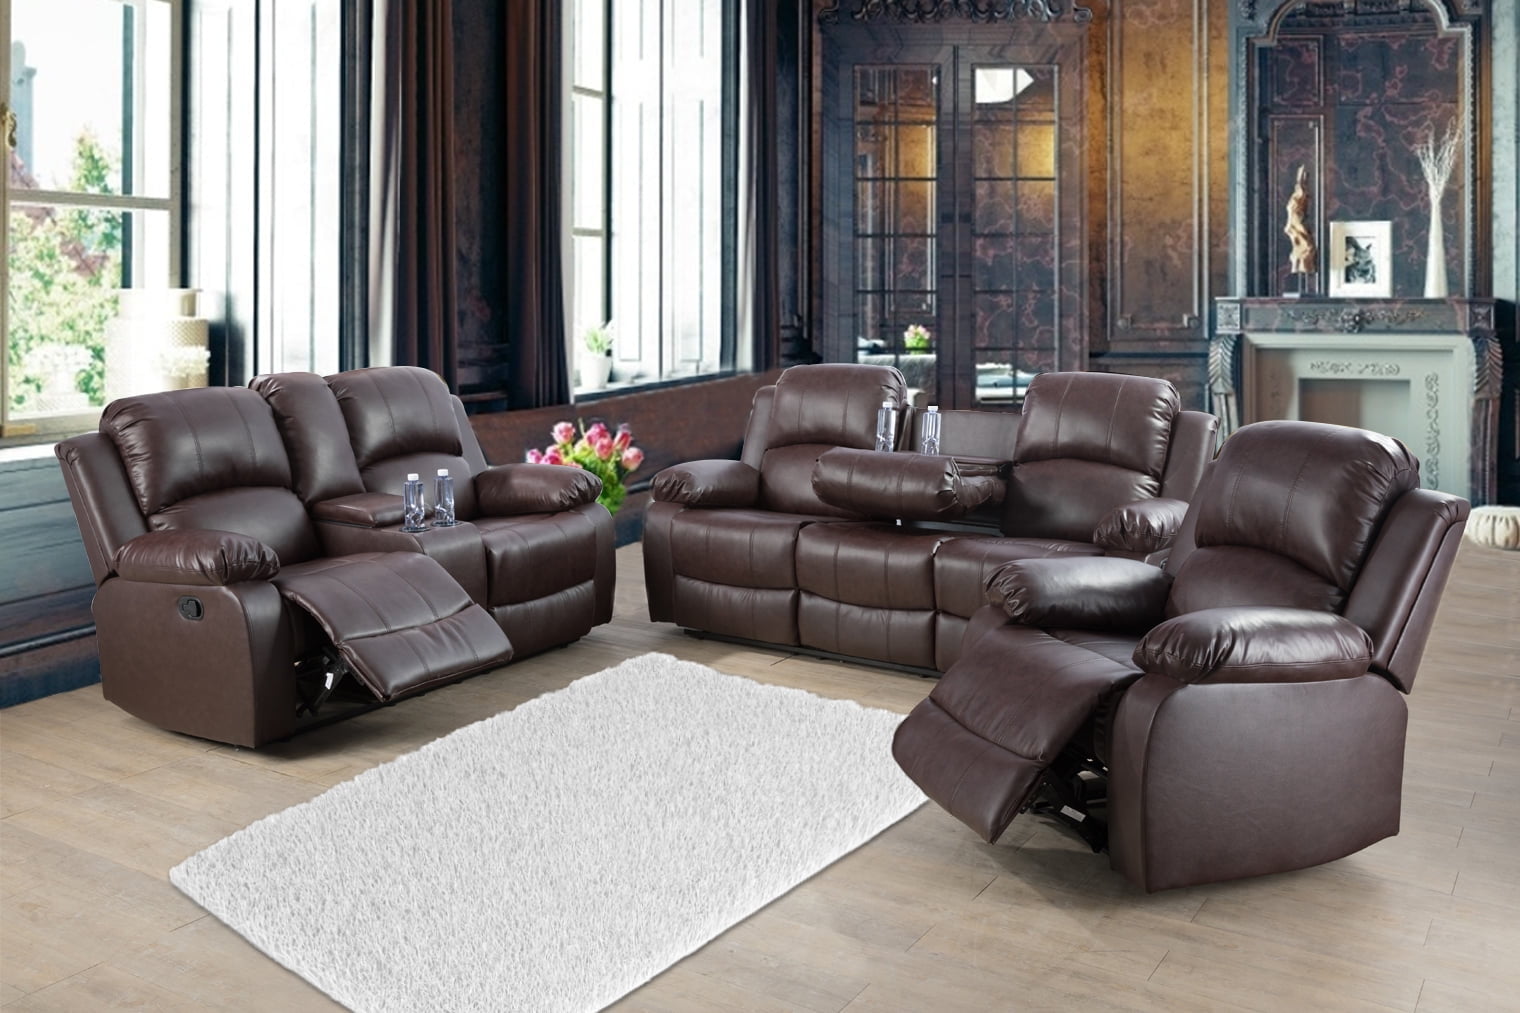 Enhance Your Space with a Leather Recliner Couch插图3